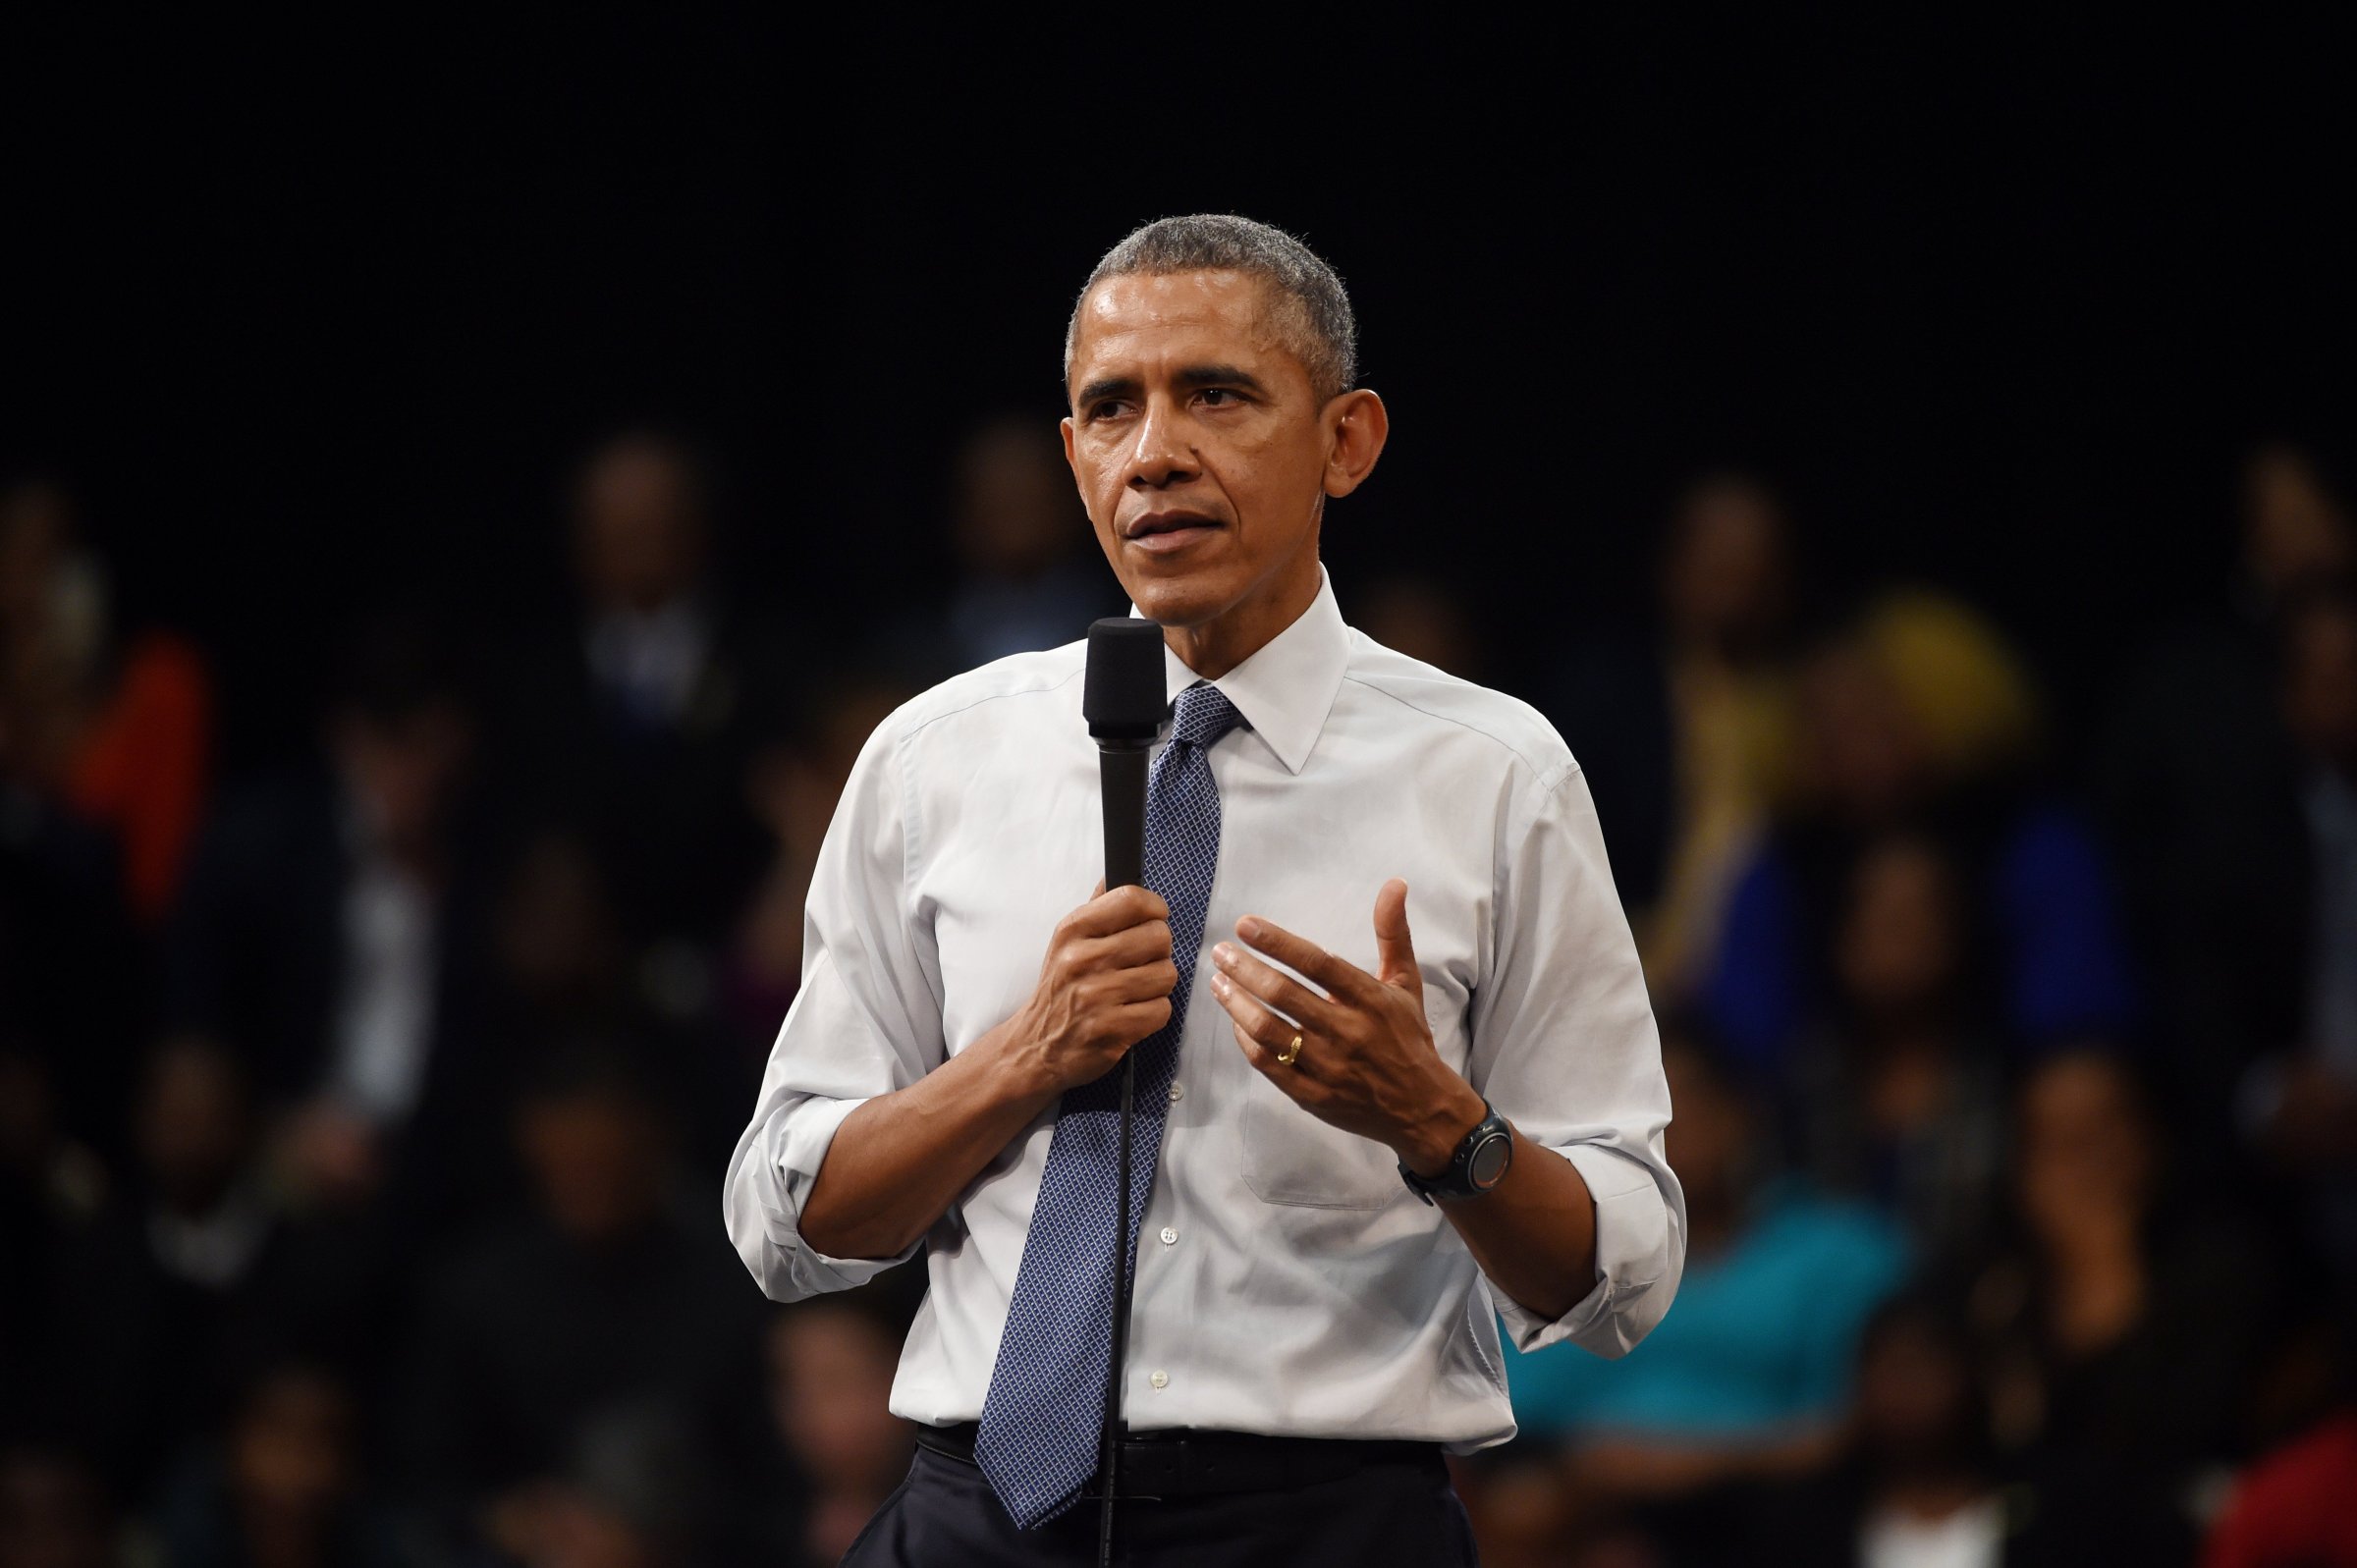 President Barack Obama speaks during a town-hall meeting about the importance of community involvement on March 6, 2015, at Benedict College in Columbia, S.C.